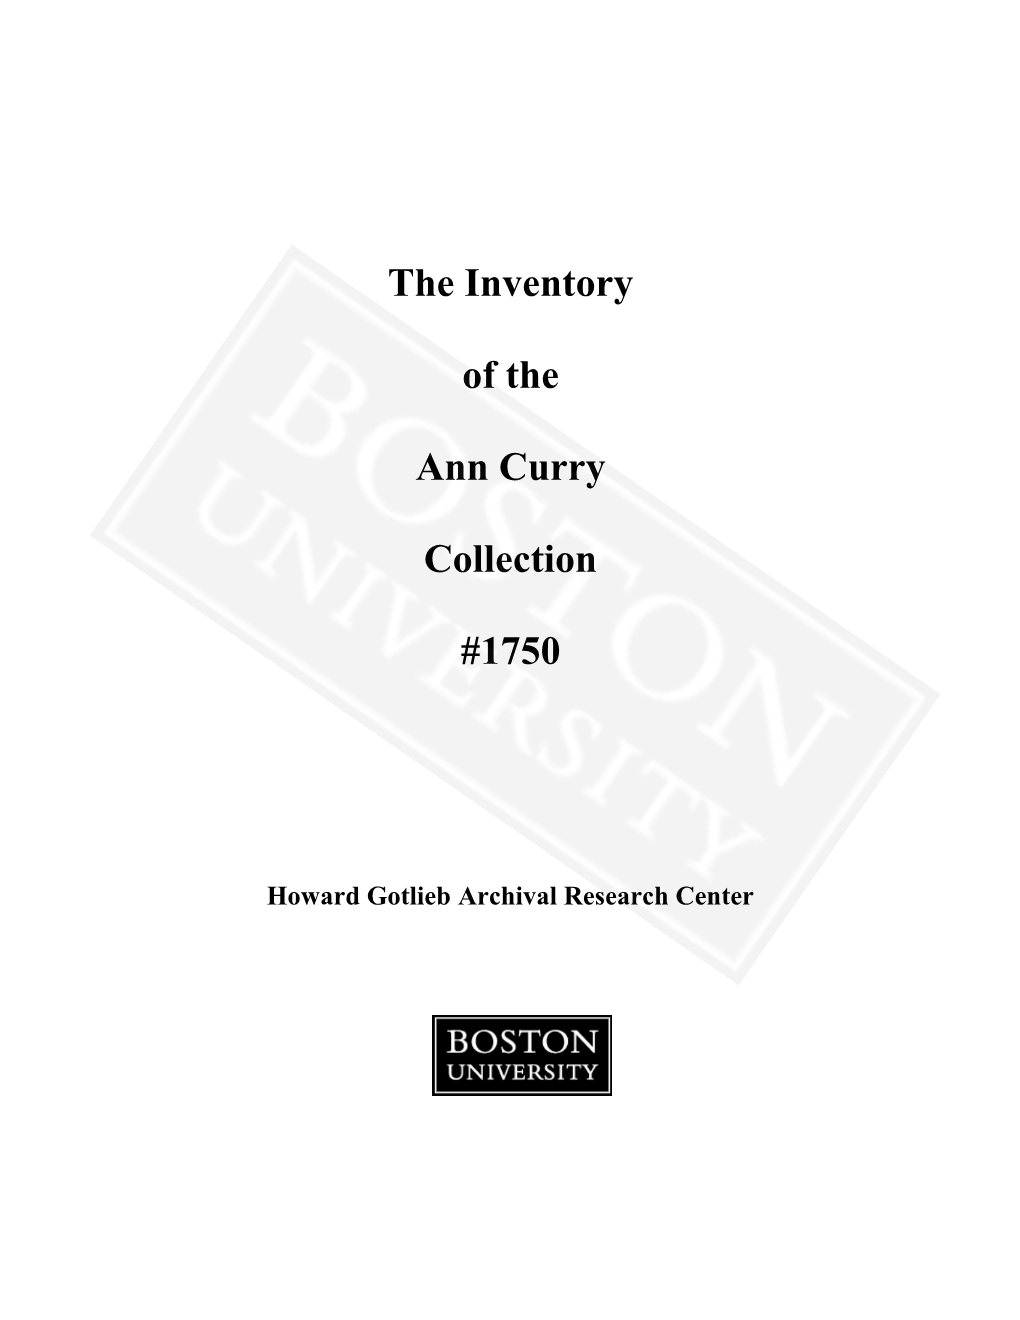 The Inventory of the Ann Curry Collection #1750